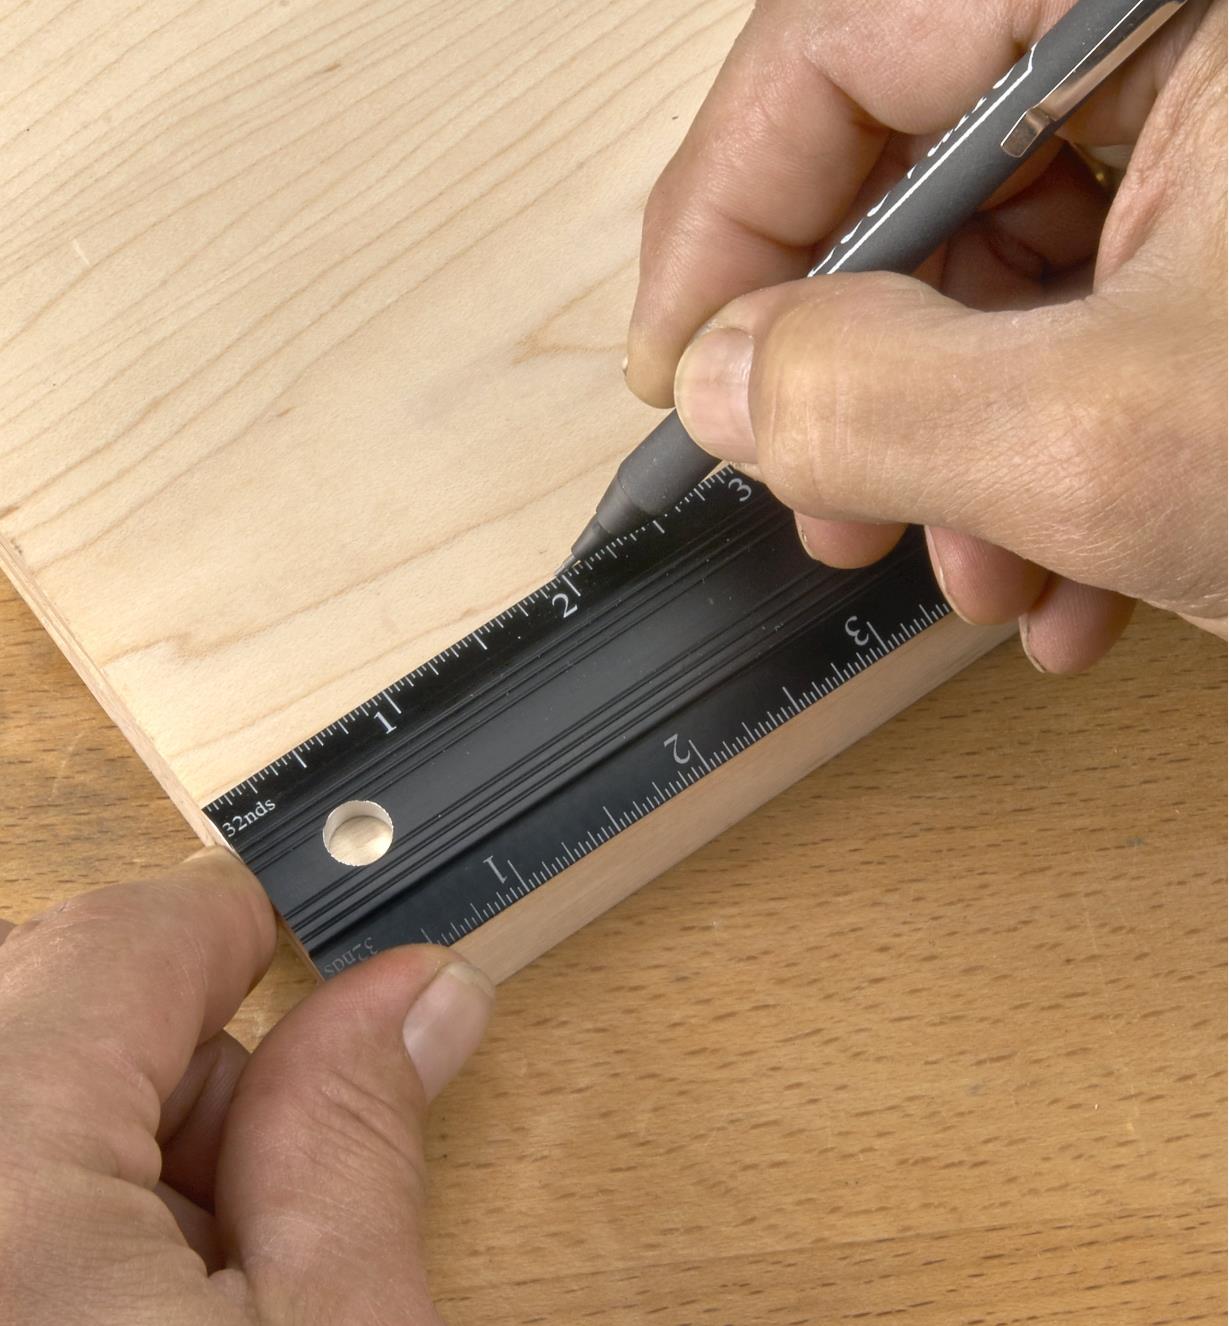 Using a pencil and a Veritas bench rule to mark a cut line on a wooden workpiece